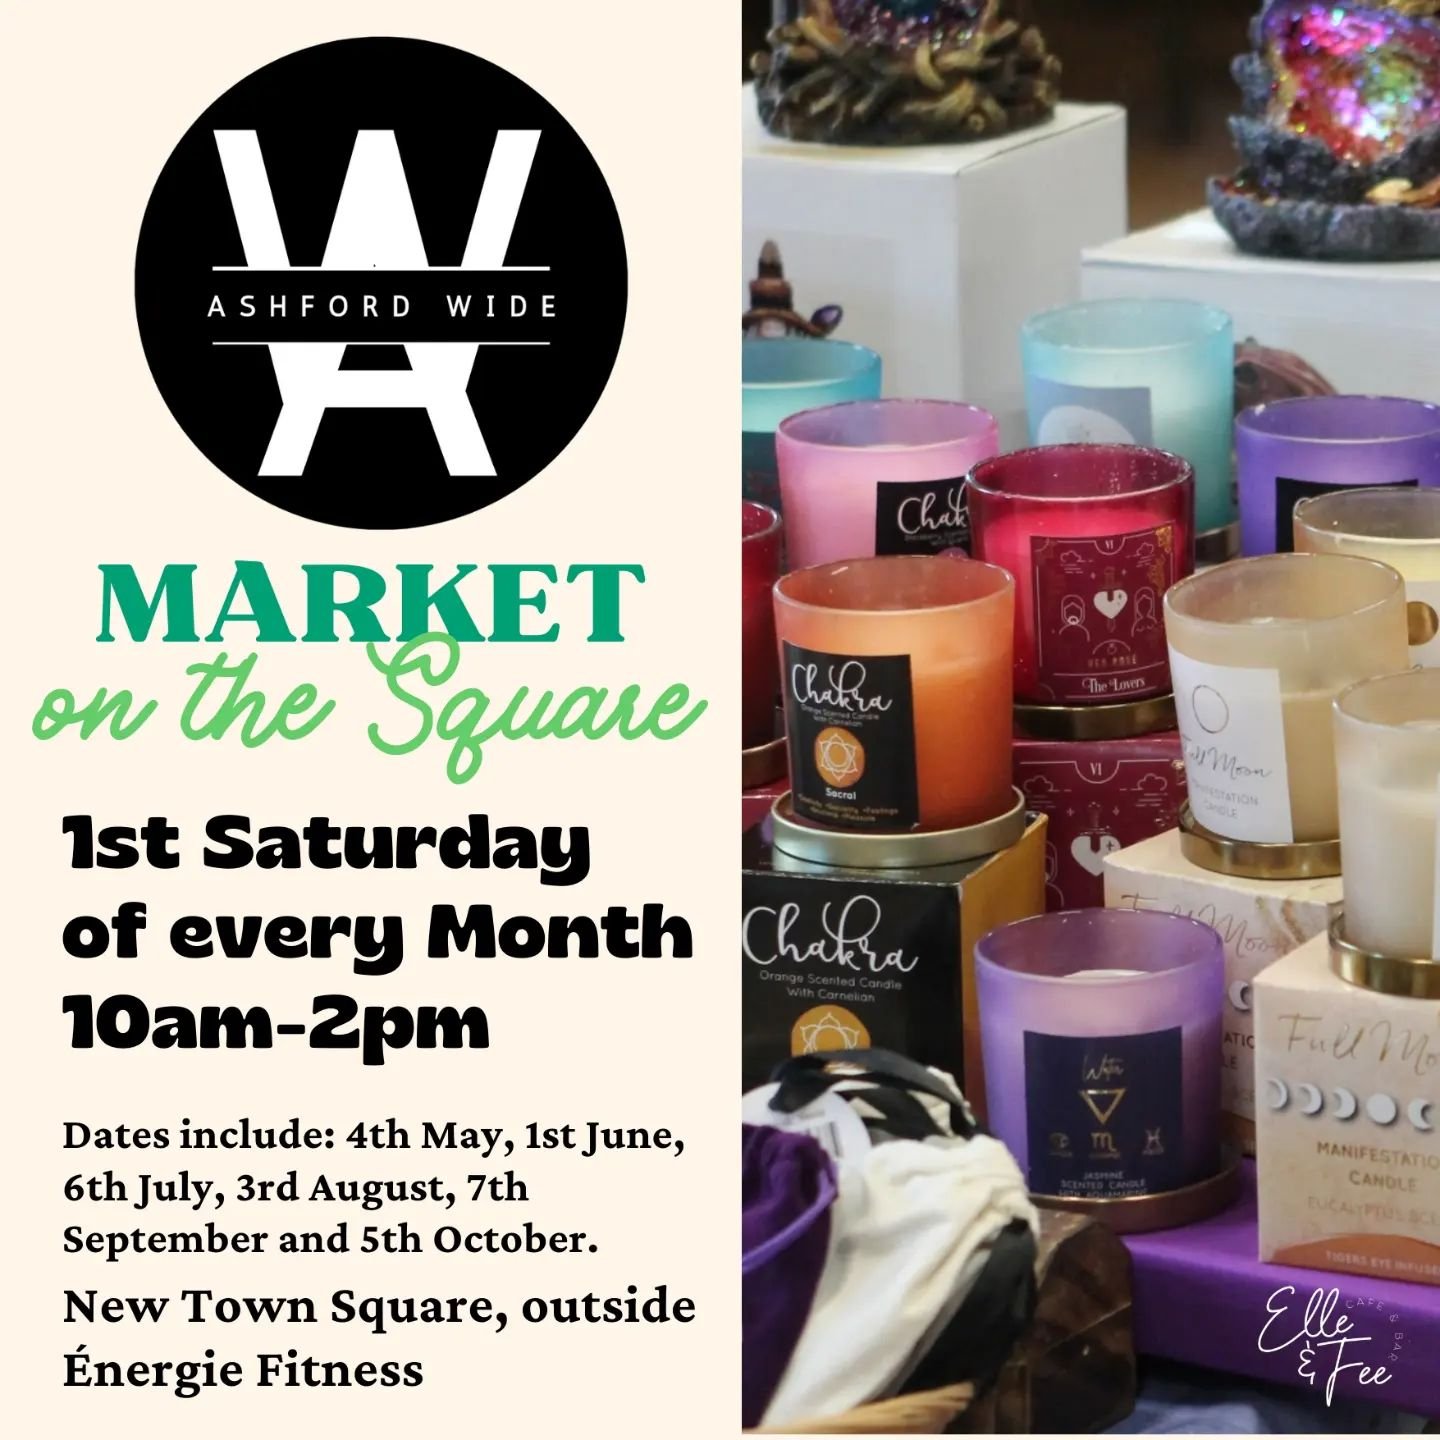 Our friends at @ashfordwide return with the Market on the Square outside Energie Fitness on Saturday 4th of May. With 5 more markets on the first Saturday of each month. 

Head down and check it out. 

#supportlocalbusiness #supportsmallbusiness #tow